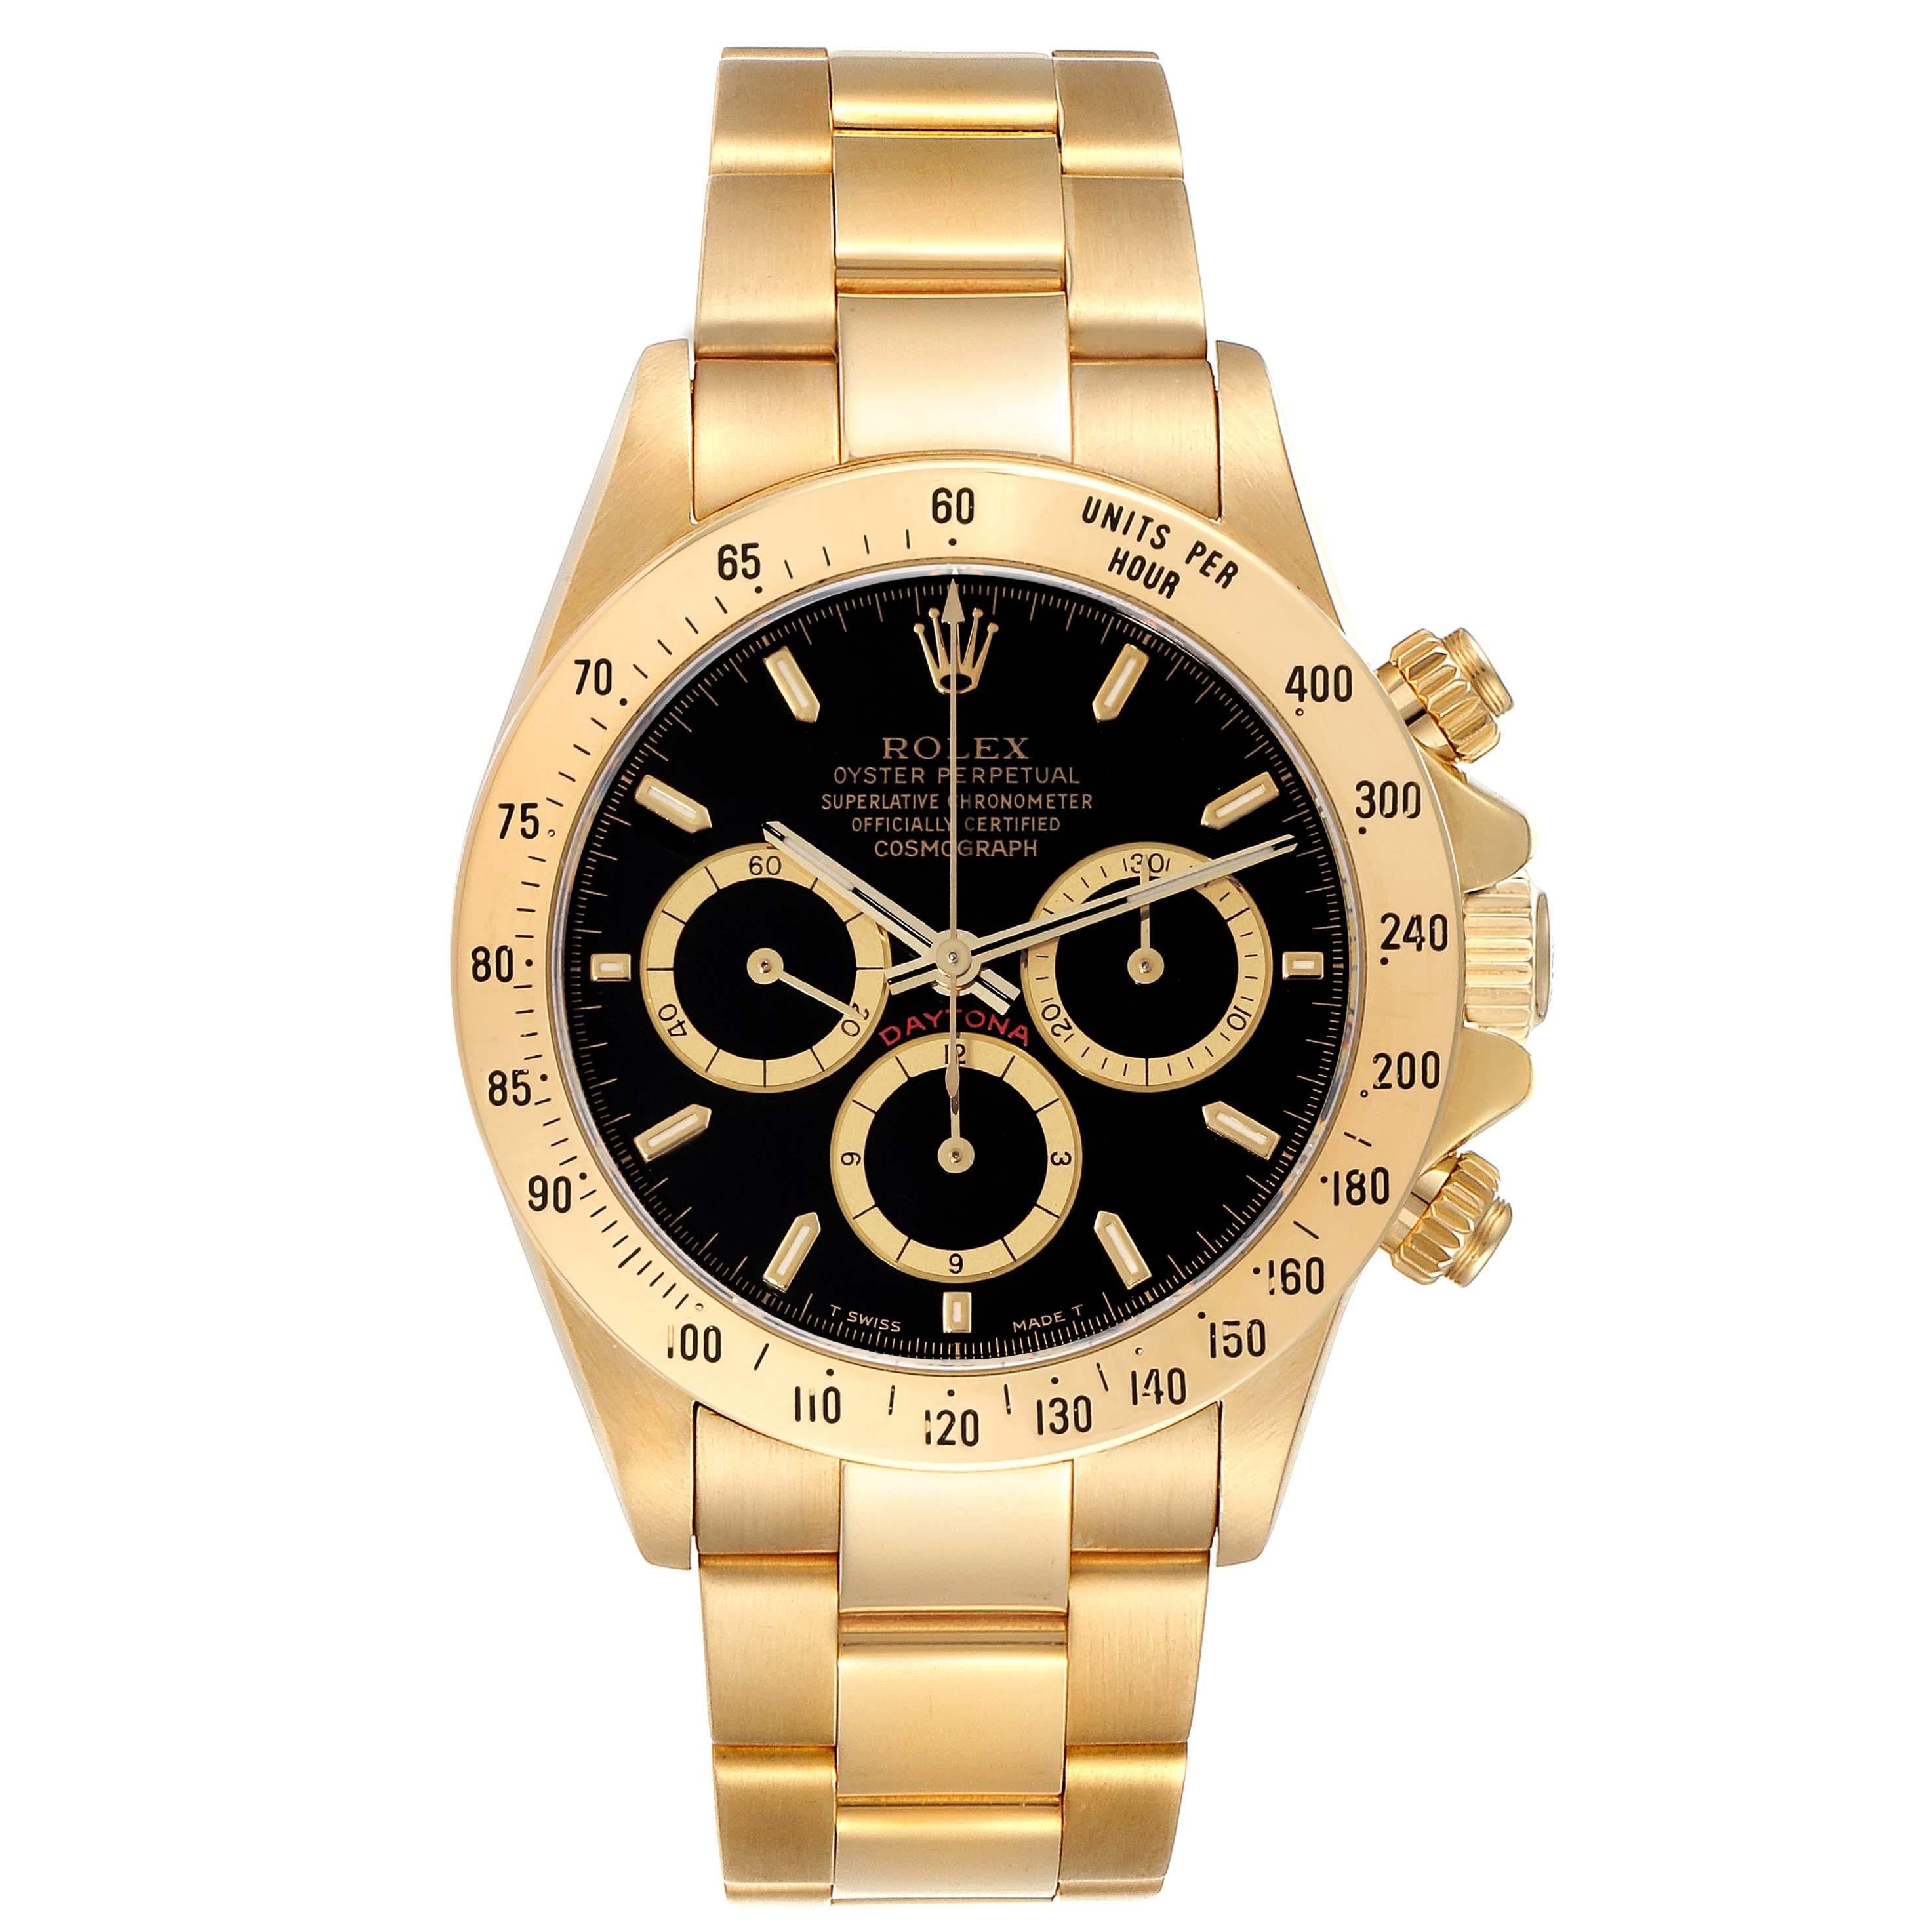 Rolex Daytona Yellow Gold Chronograph Mens Watch 16528. Officially certified chronometer automatic self-winding movement. 18K yellow gold case 40.0 mm in diameter. Special screw-down push buttons. Triplock winding crown protected by the crown